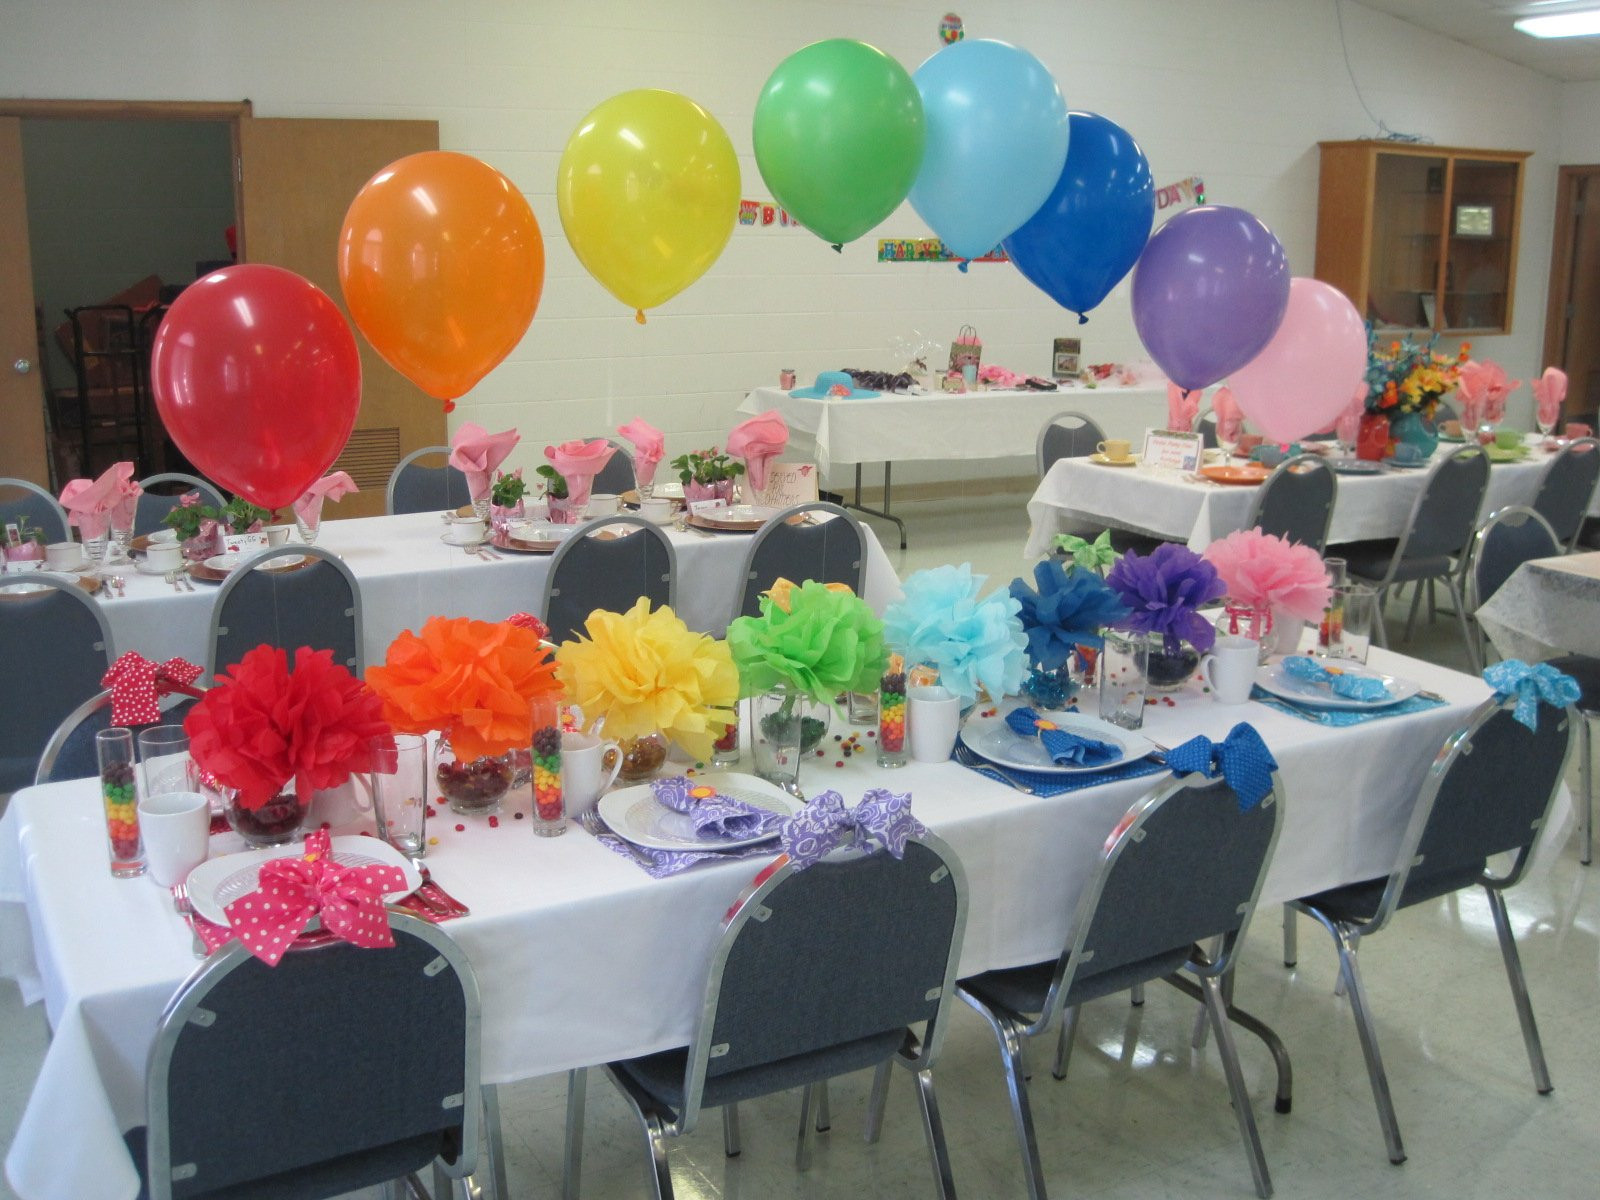 Retirement Party Table Decorations Ideas
 My Retirement party An Unfor table Experience of My